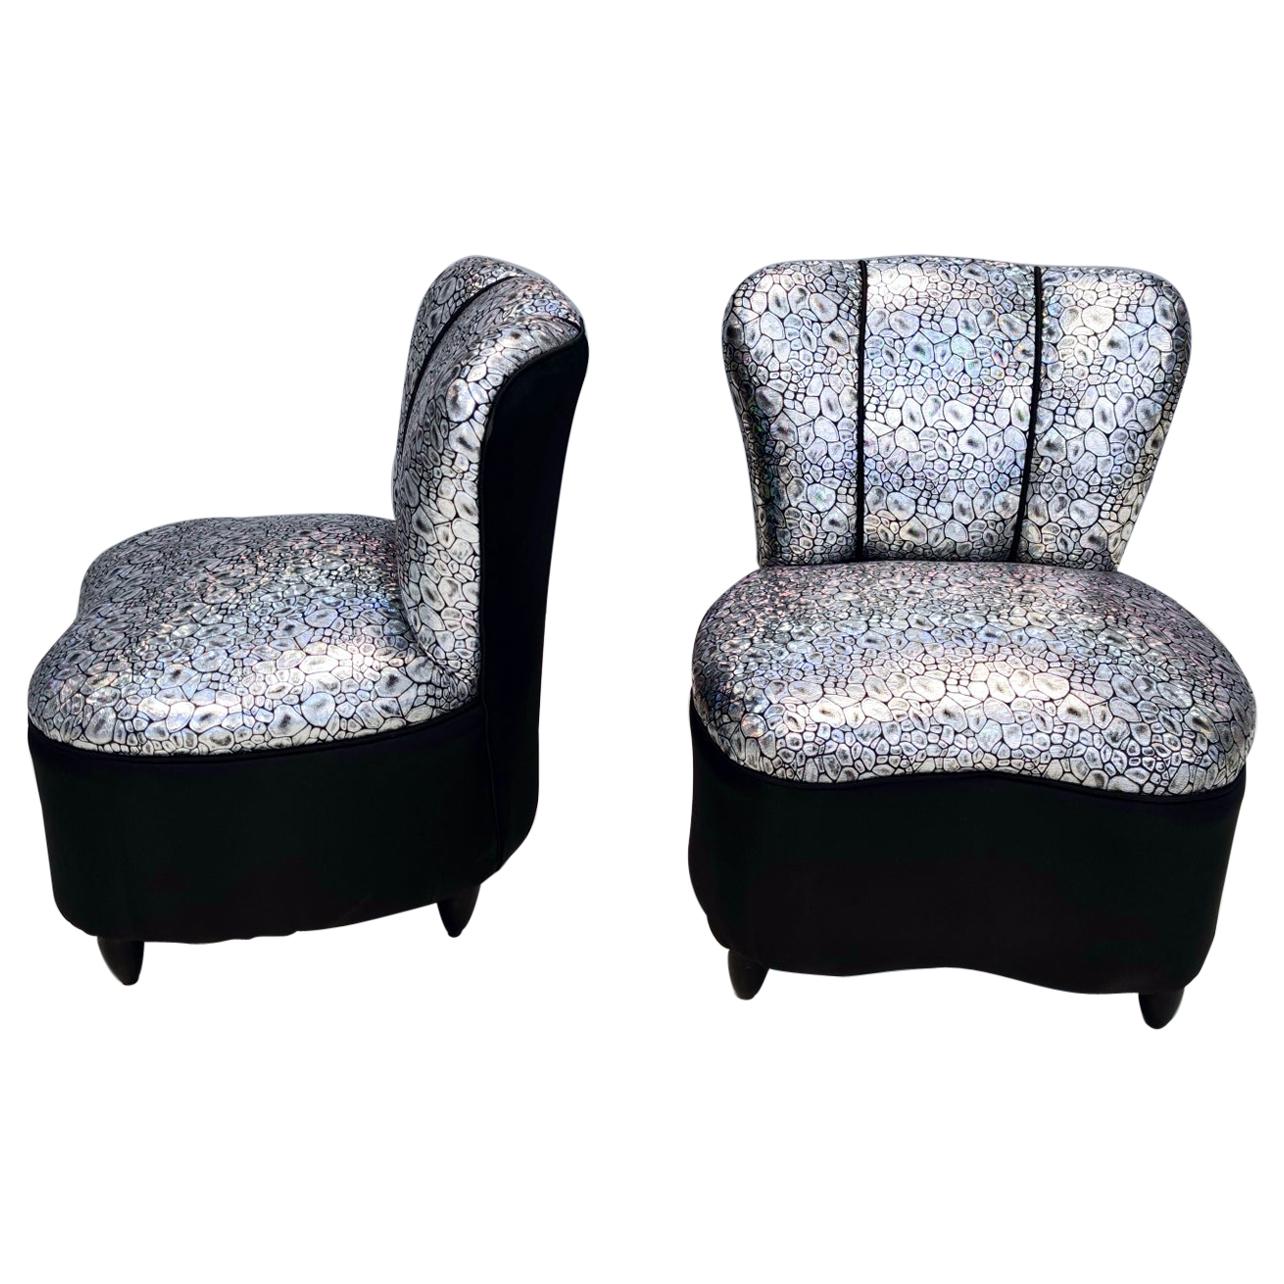 Pair of Vintage Lounge Chairs with Holographic Fabric Upholstery, Italy For Sale